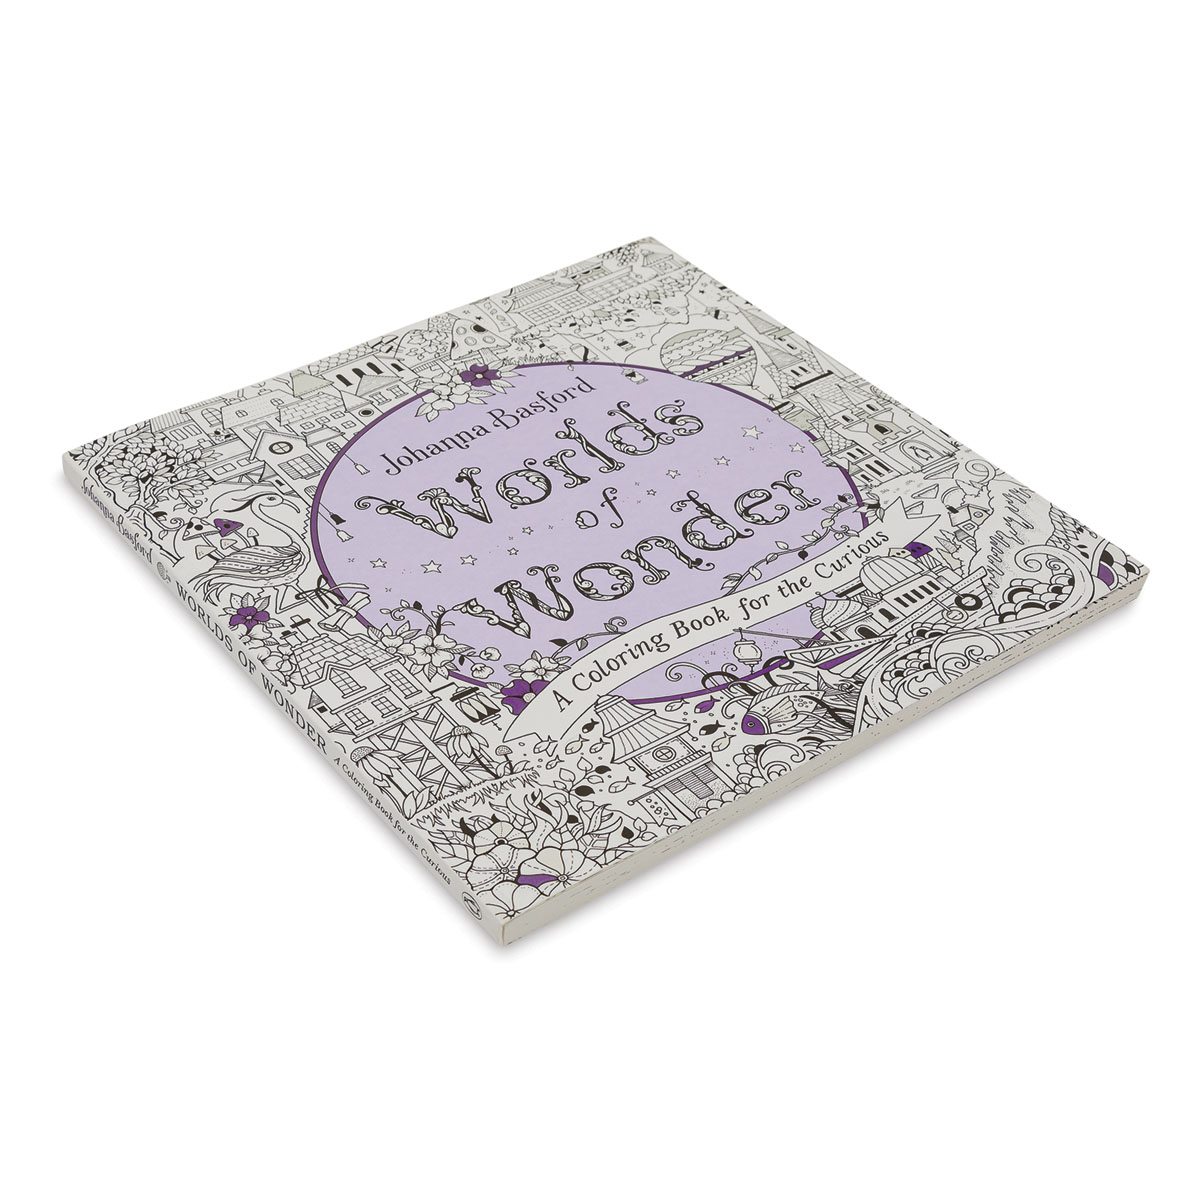  Worlds of Wonder: A Coloring Book for the Curious:  9780143136064: Basford, Johanna: Books